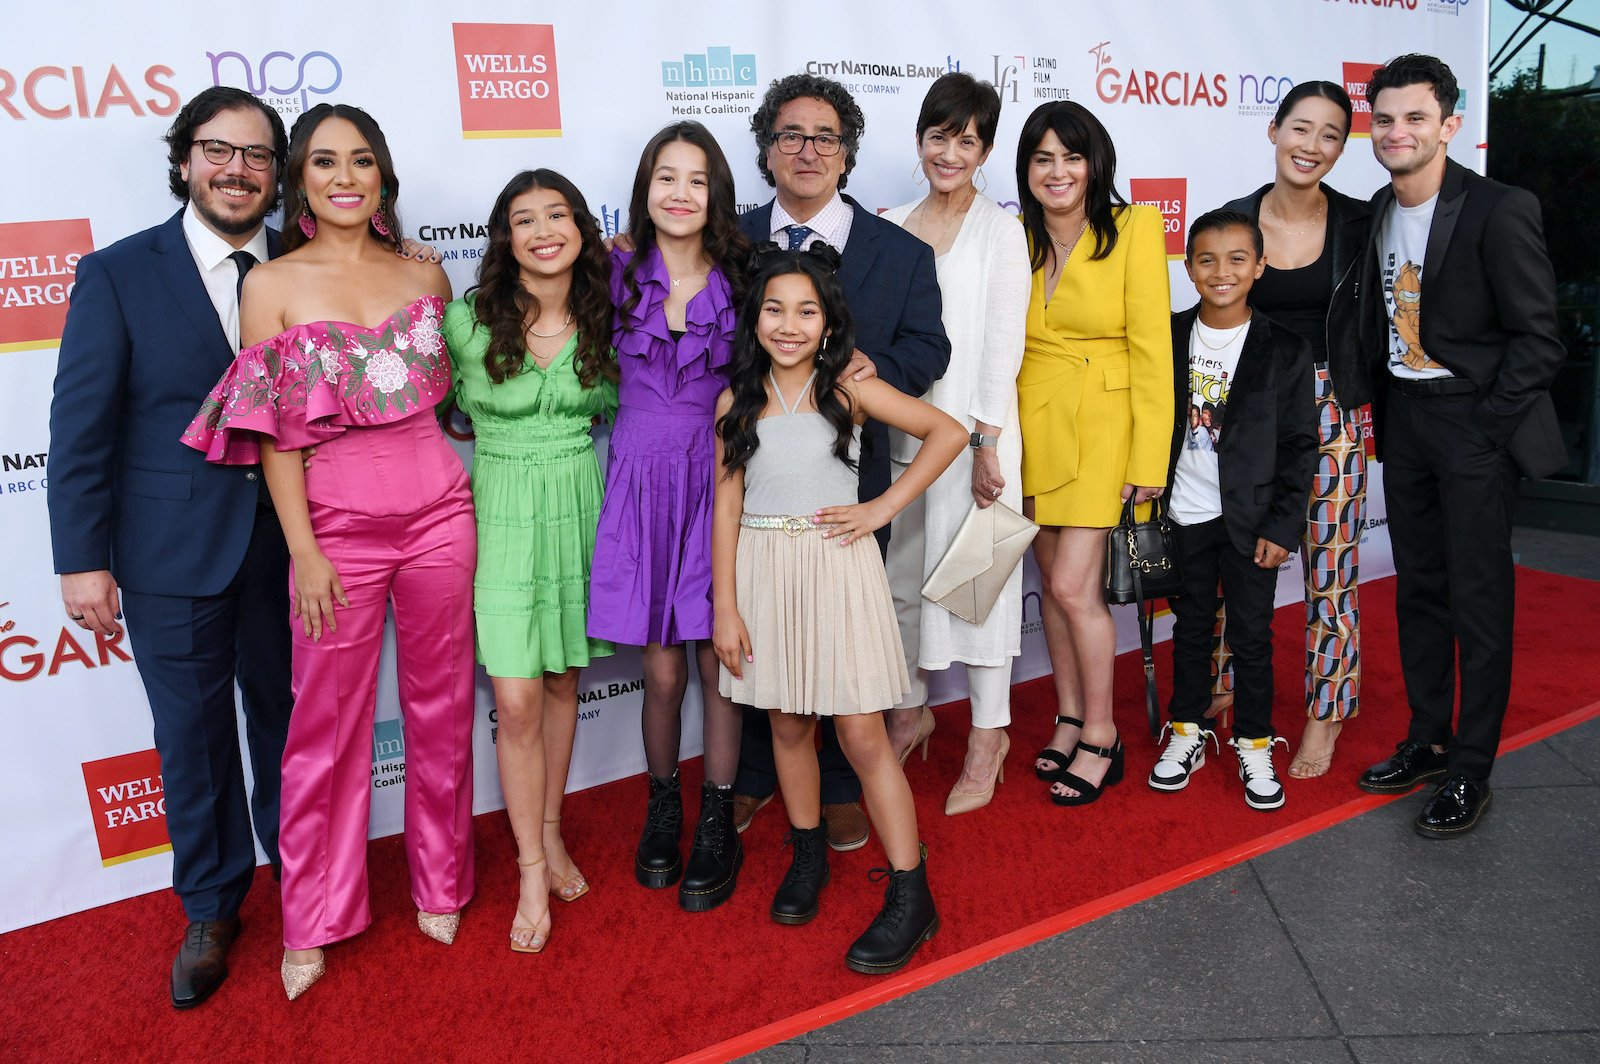 'The Garcias' cast smile on the step and repeat during the premiere event of 'The Garcias'